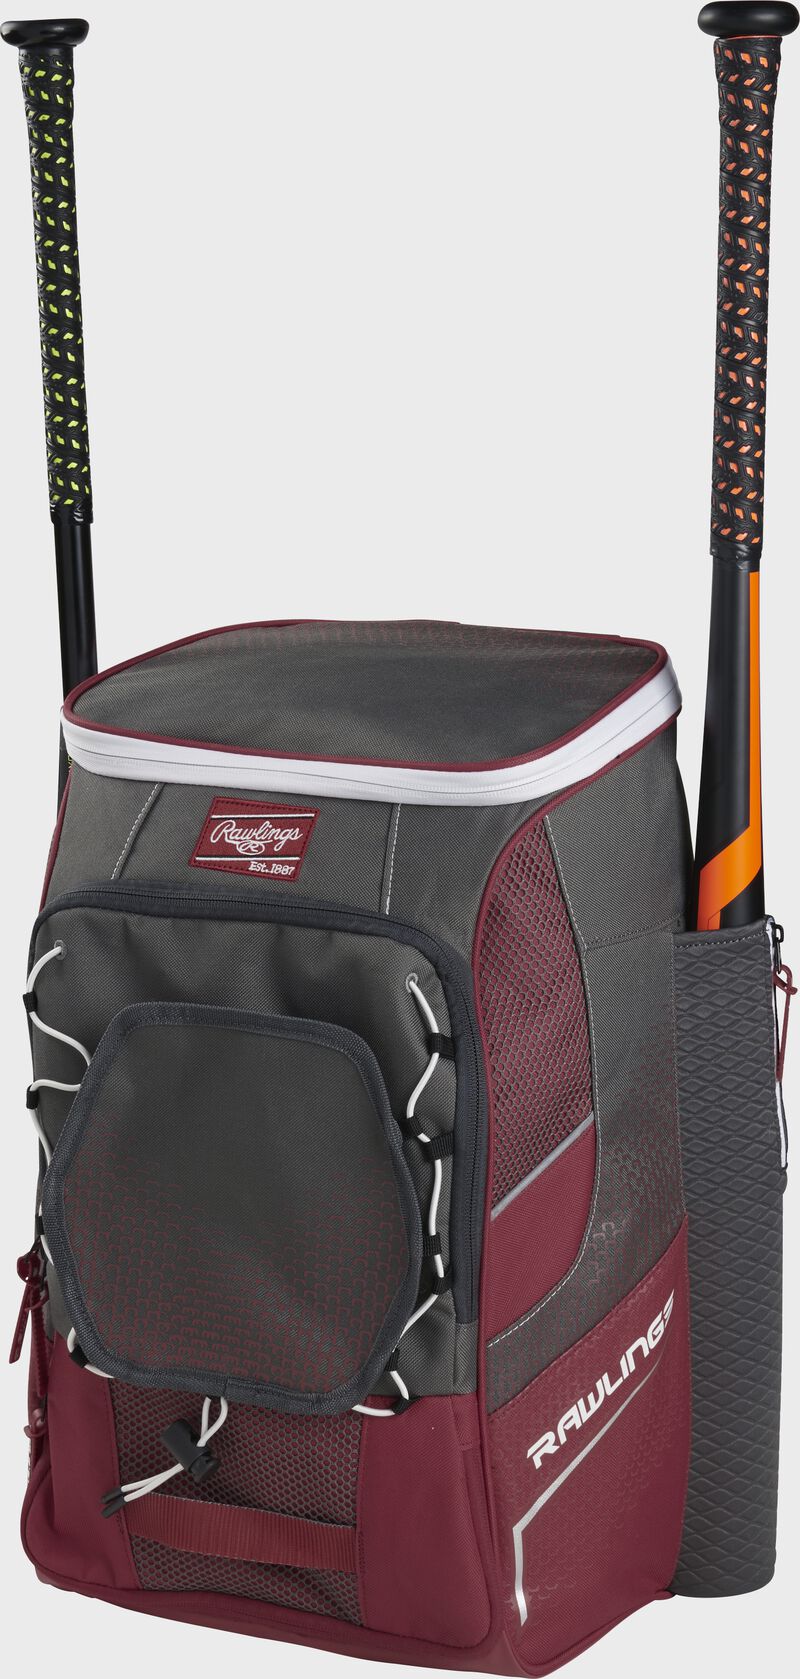 Front right angle view of a cardinal Impulse backpack with two bats in the side sleeves - SKU: IMPLSE-C loading=